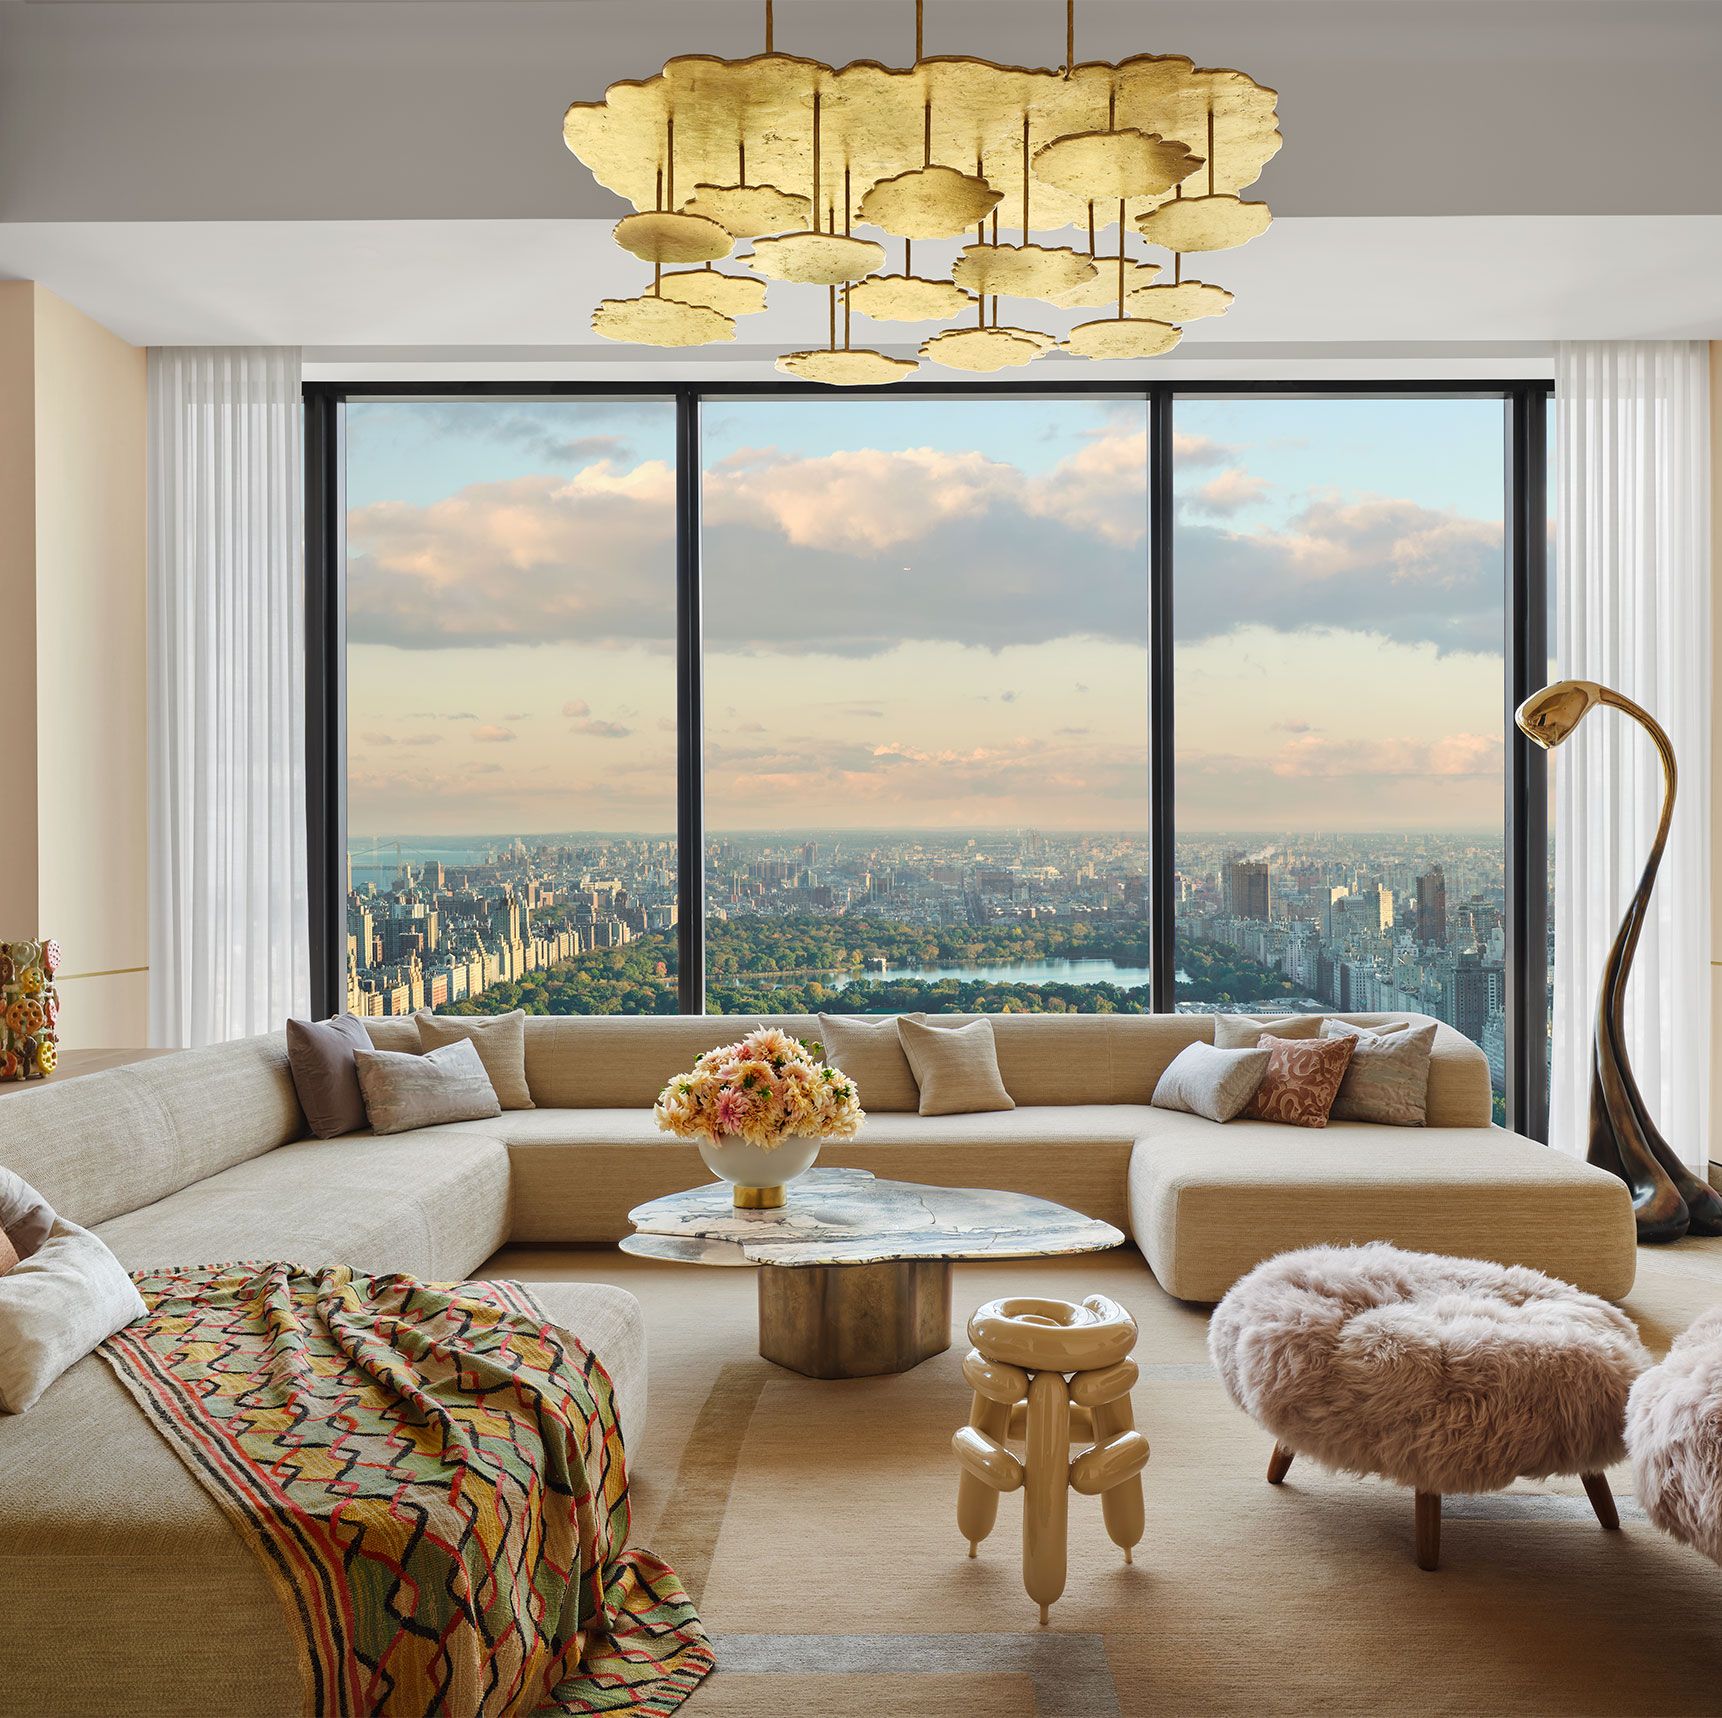 Kelly Behun Basically Created an Art Museum in the Clouds for a Manhattan Homeowner